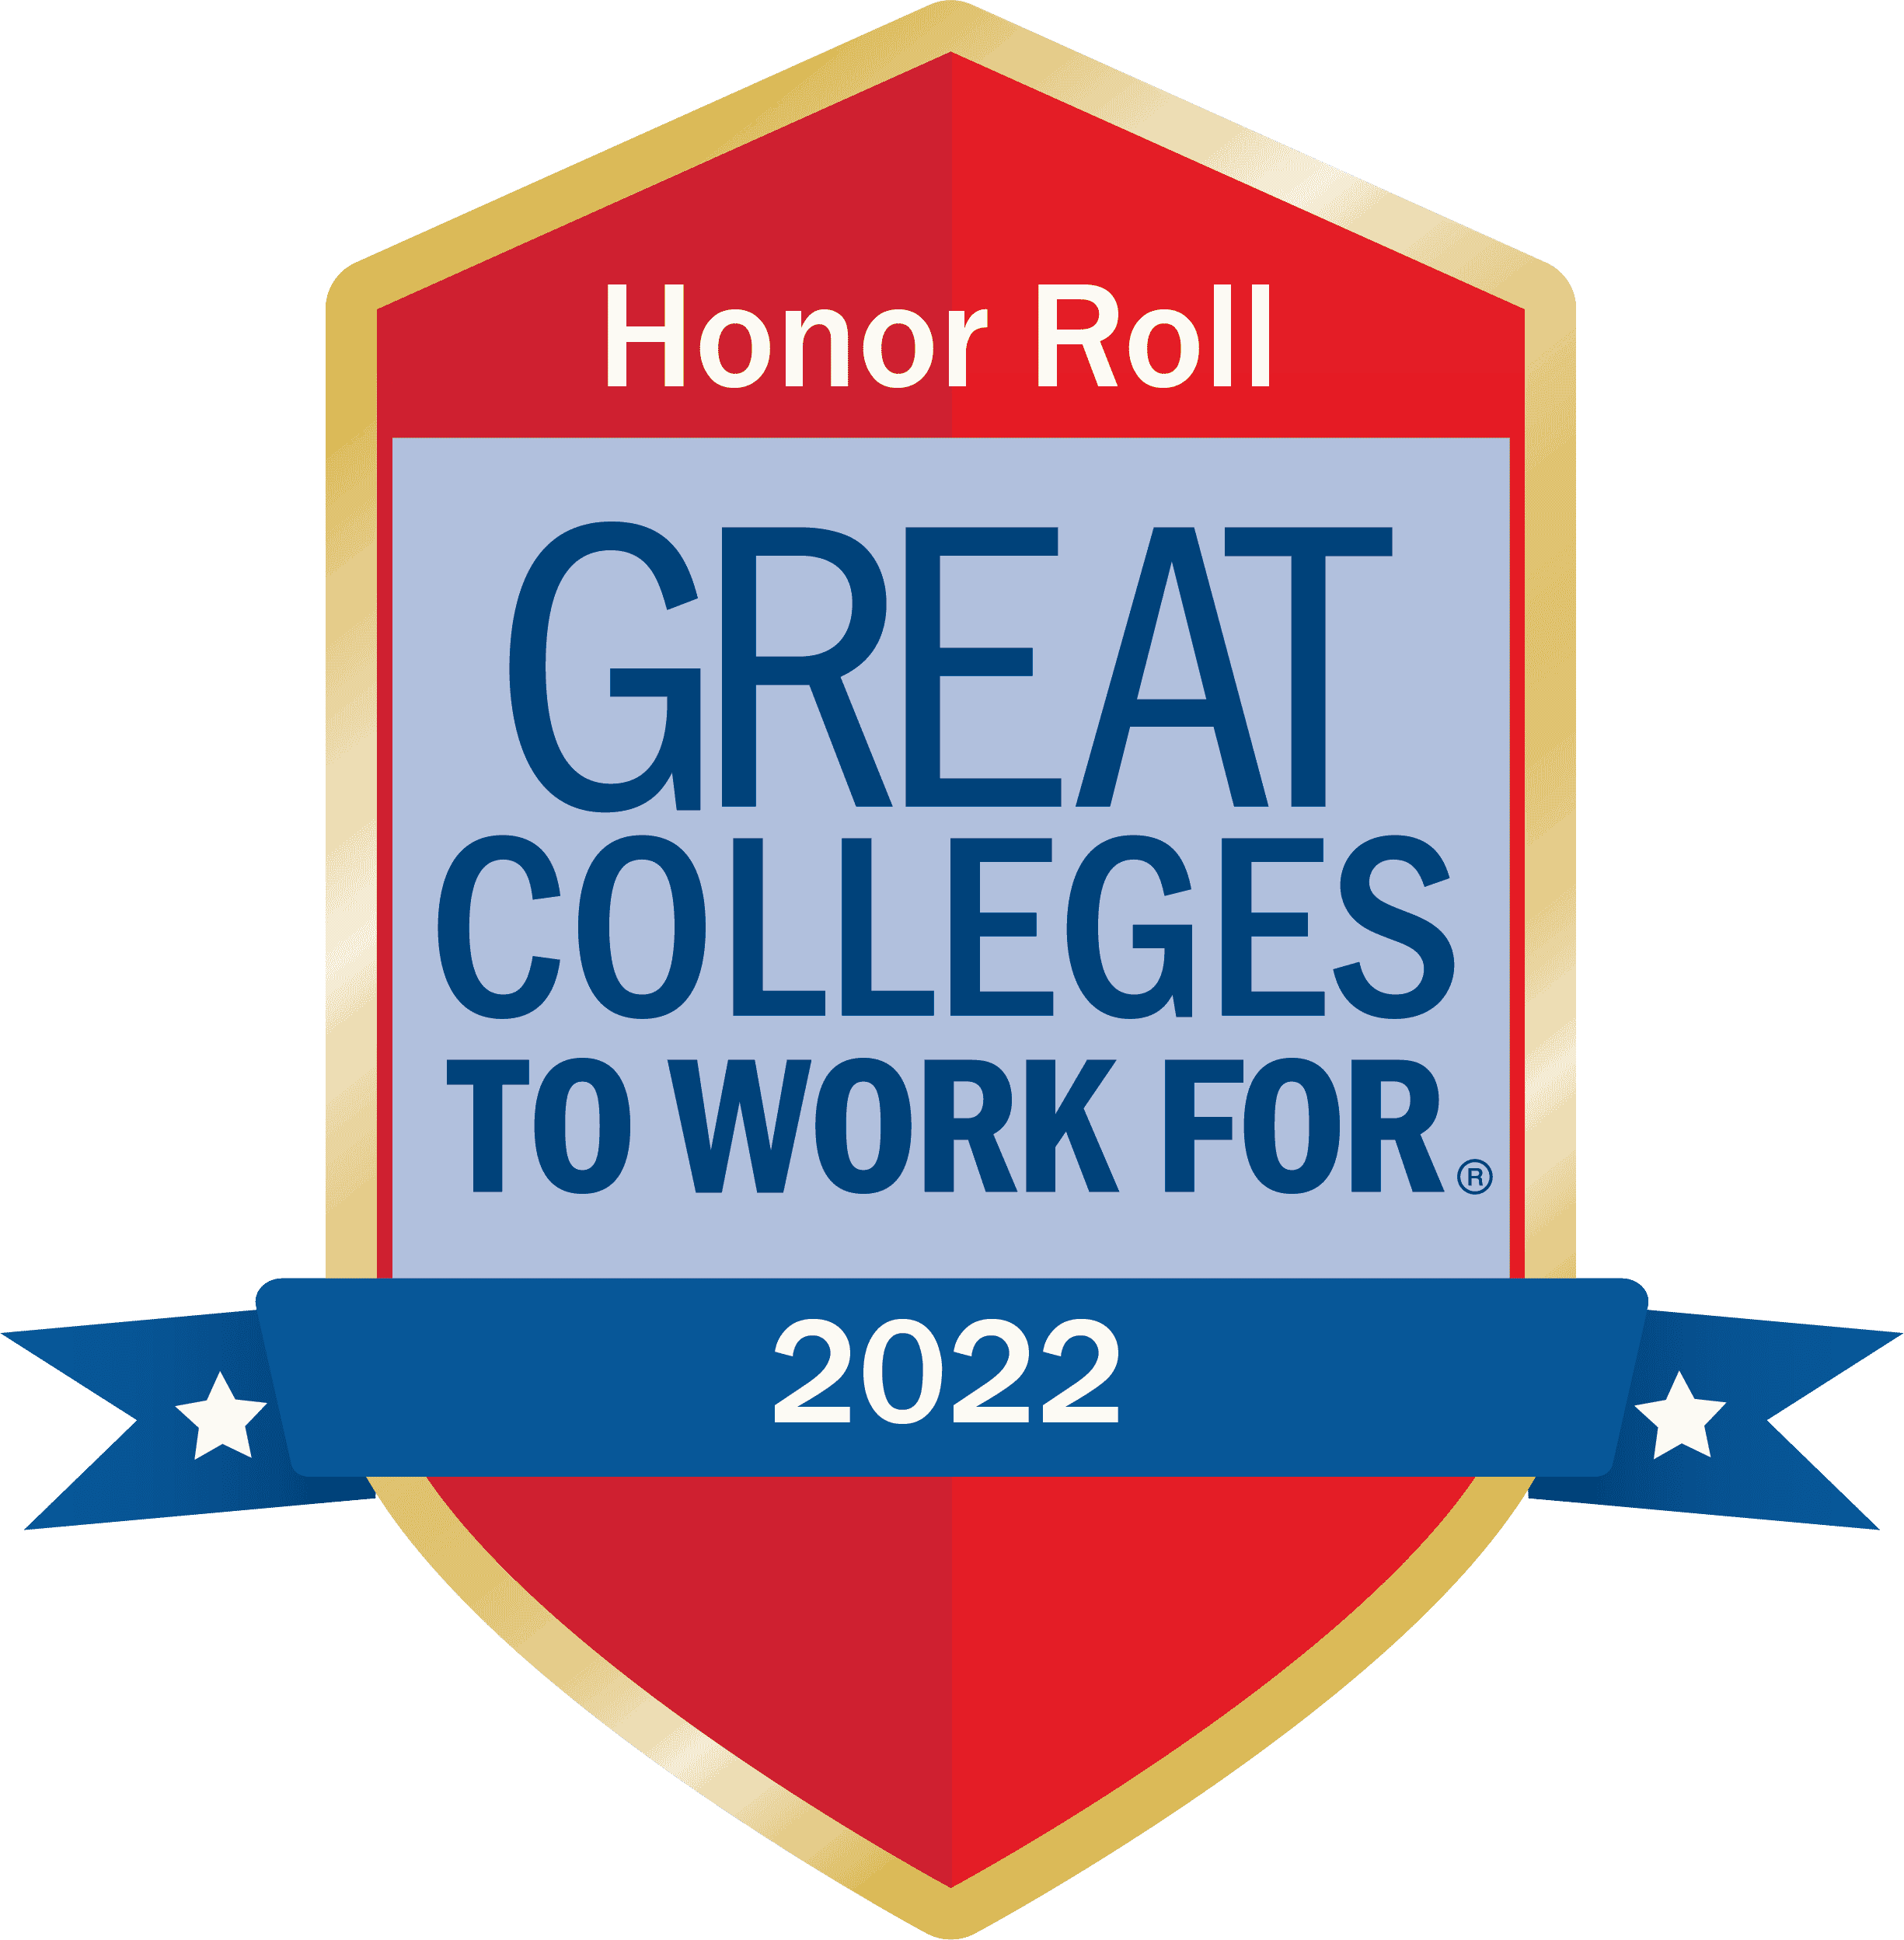 Francis Marion University earns perfect marks as Great College to Work For for second year in a row